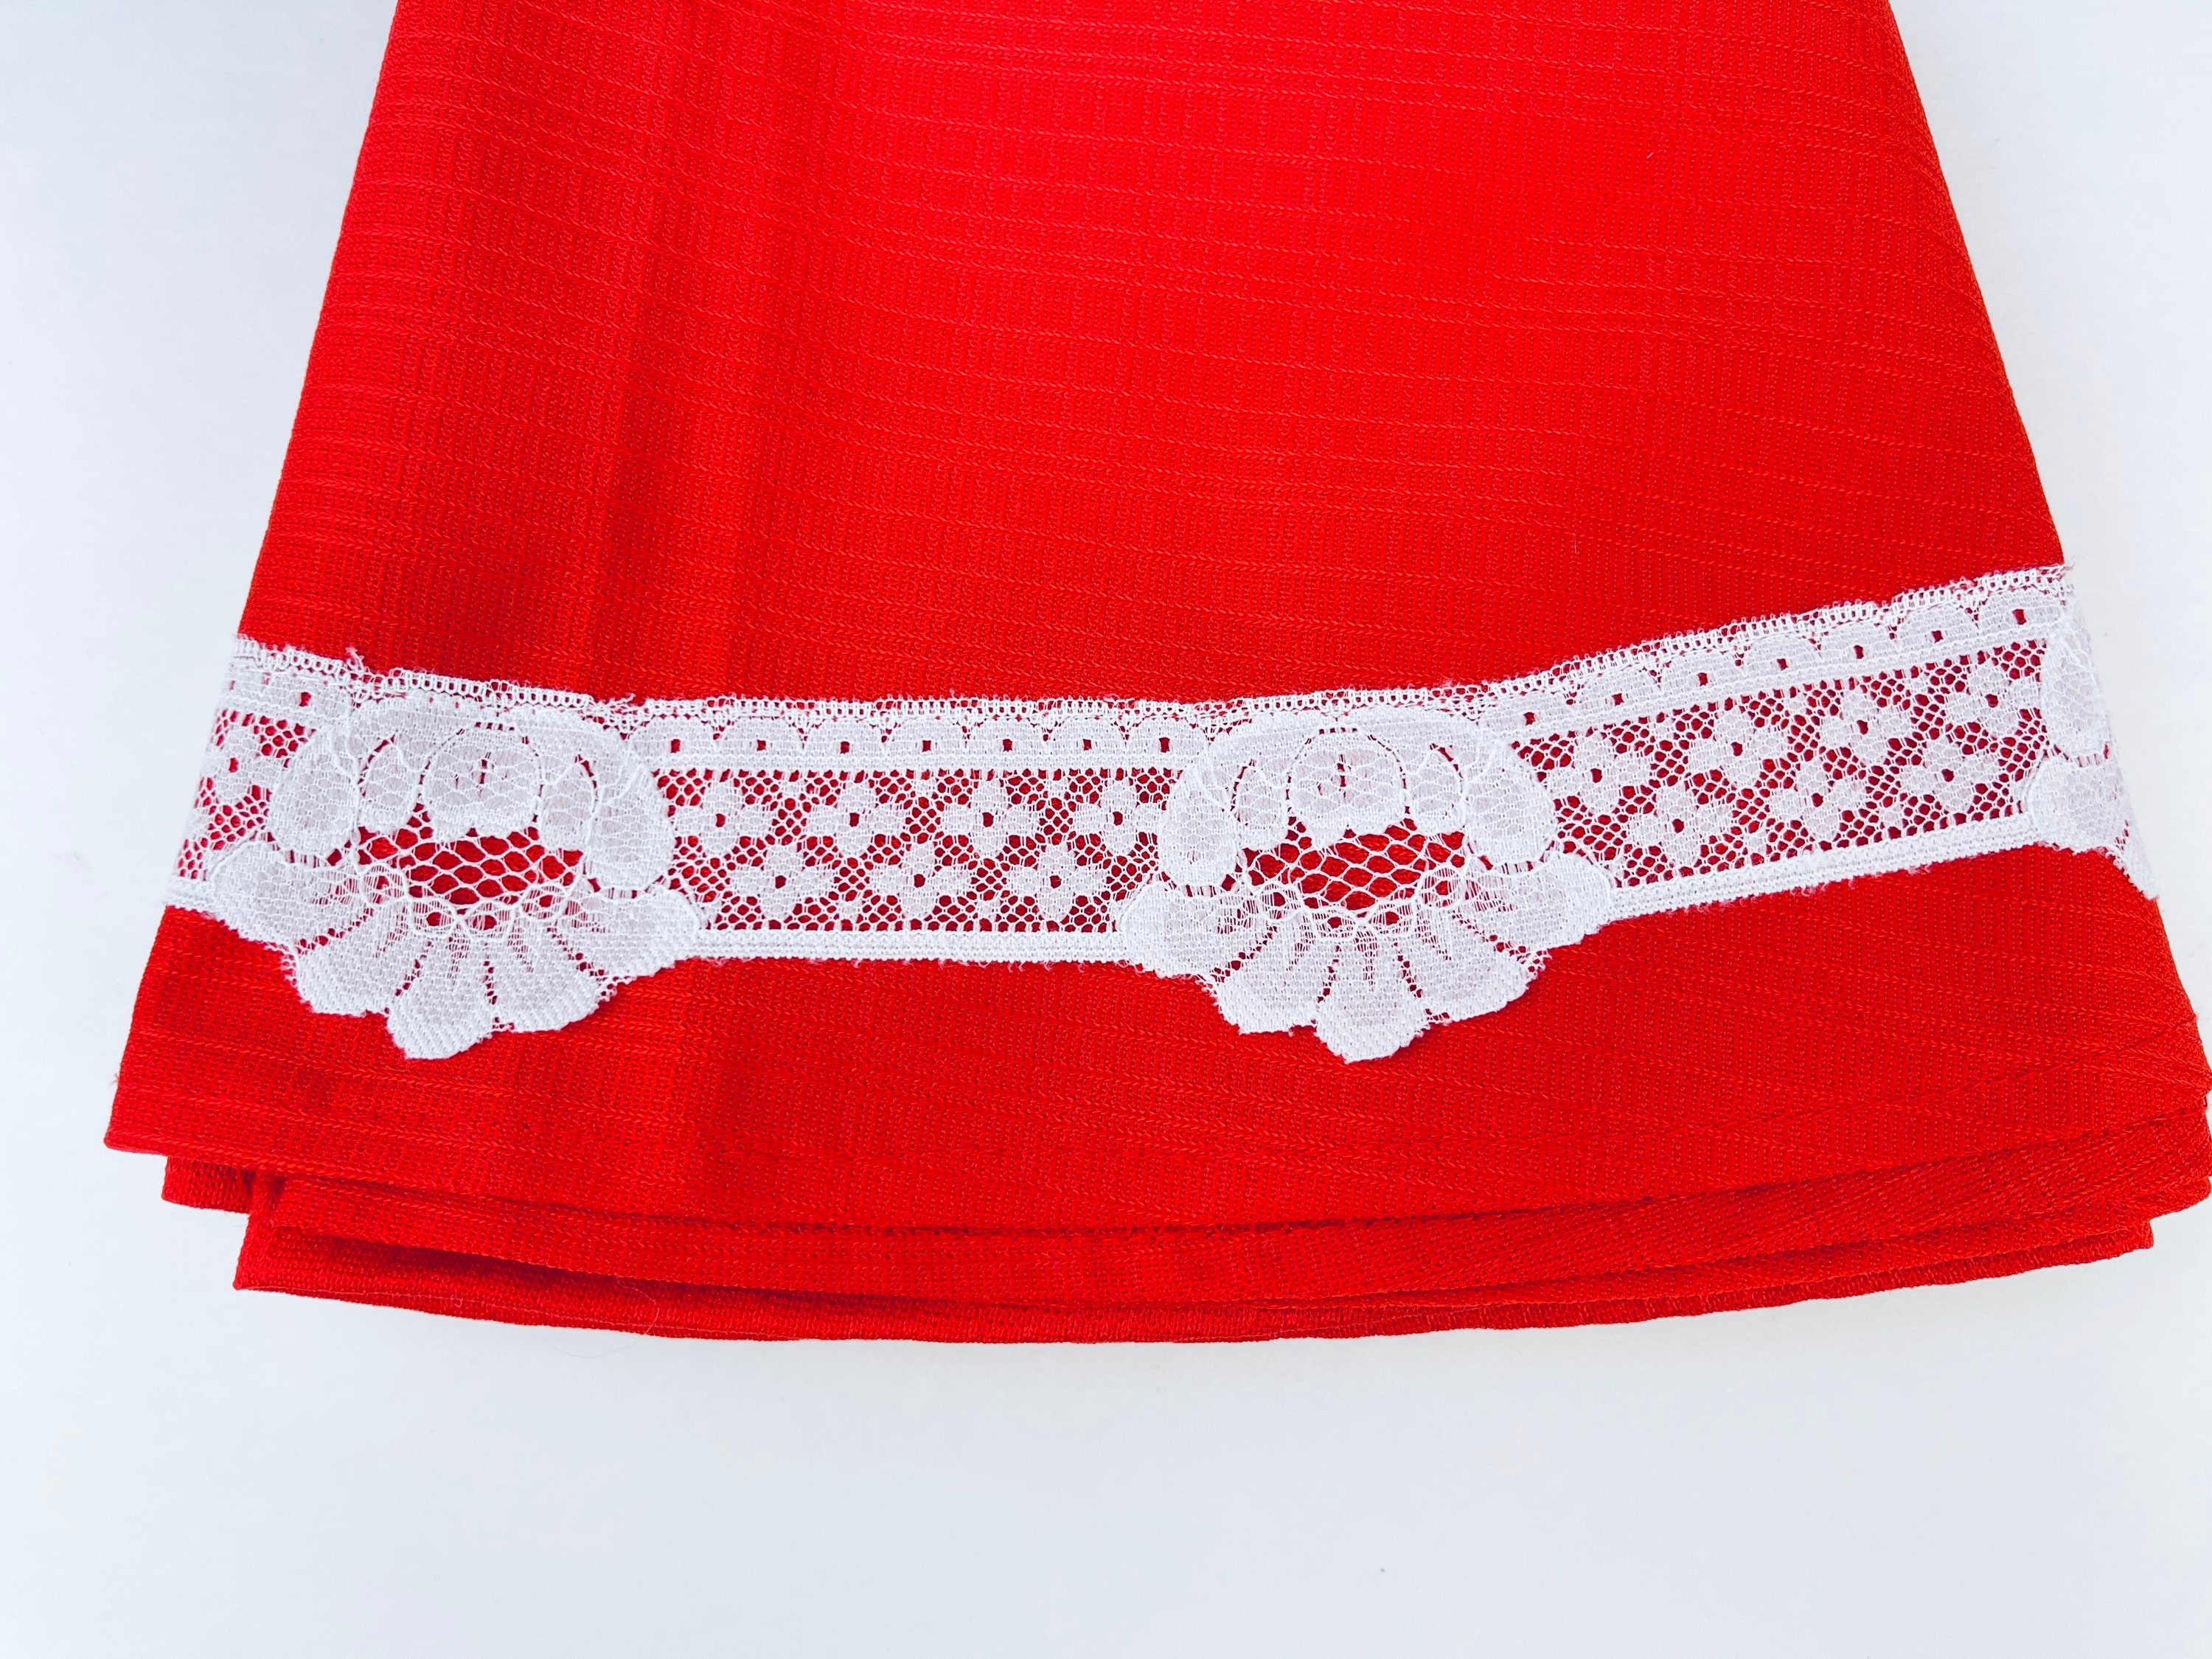 Lace Trim Guipure 30mm RED 1.18 Inches Venice Lace Trim, Heart Lace  Trim,guipure Trim Runner, Towel, Pillow,dress, Curtain, Tablecloth 